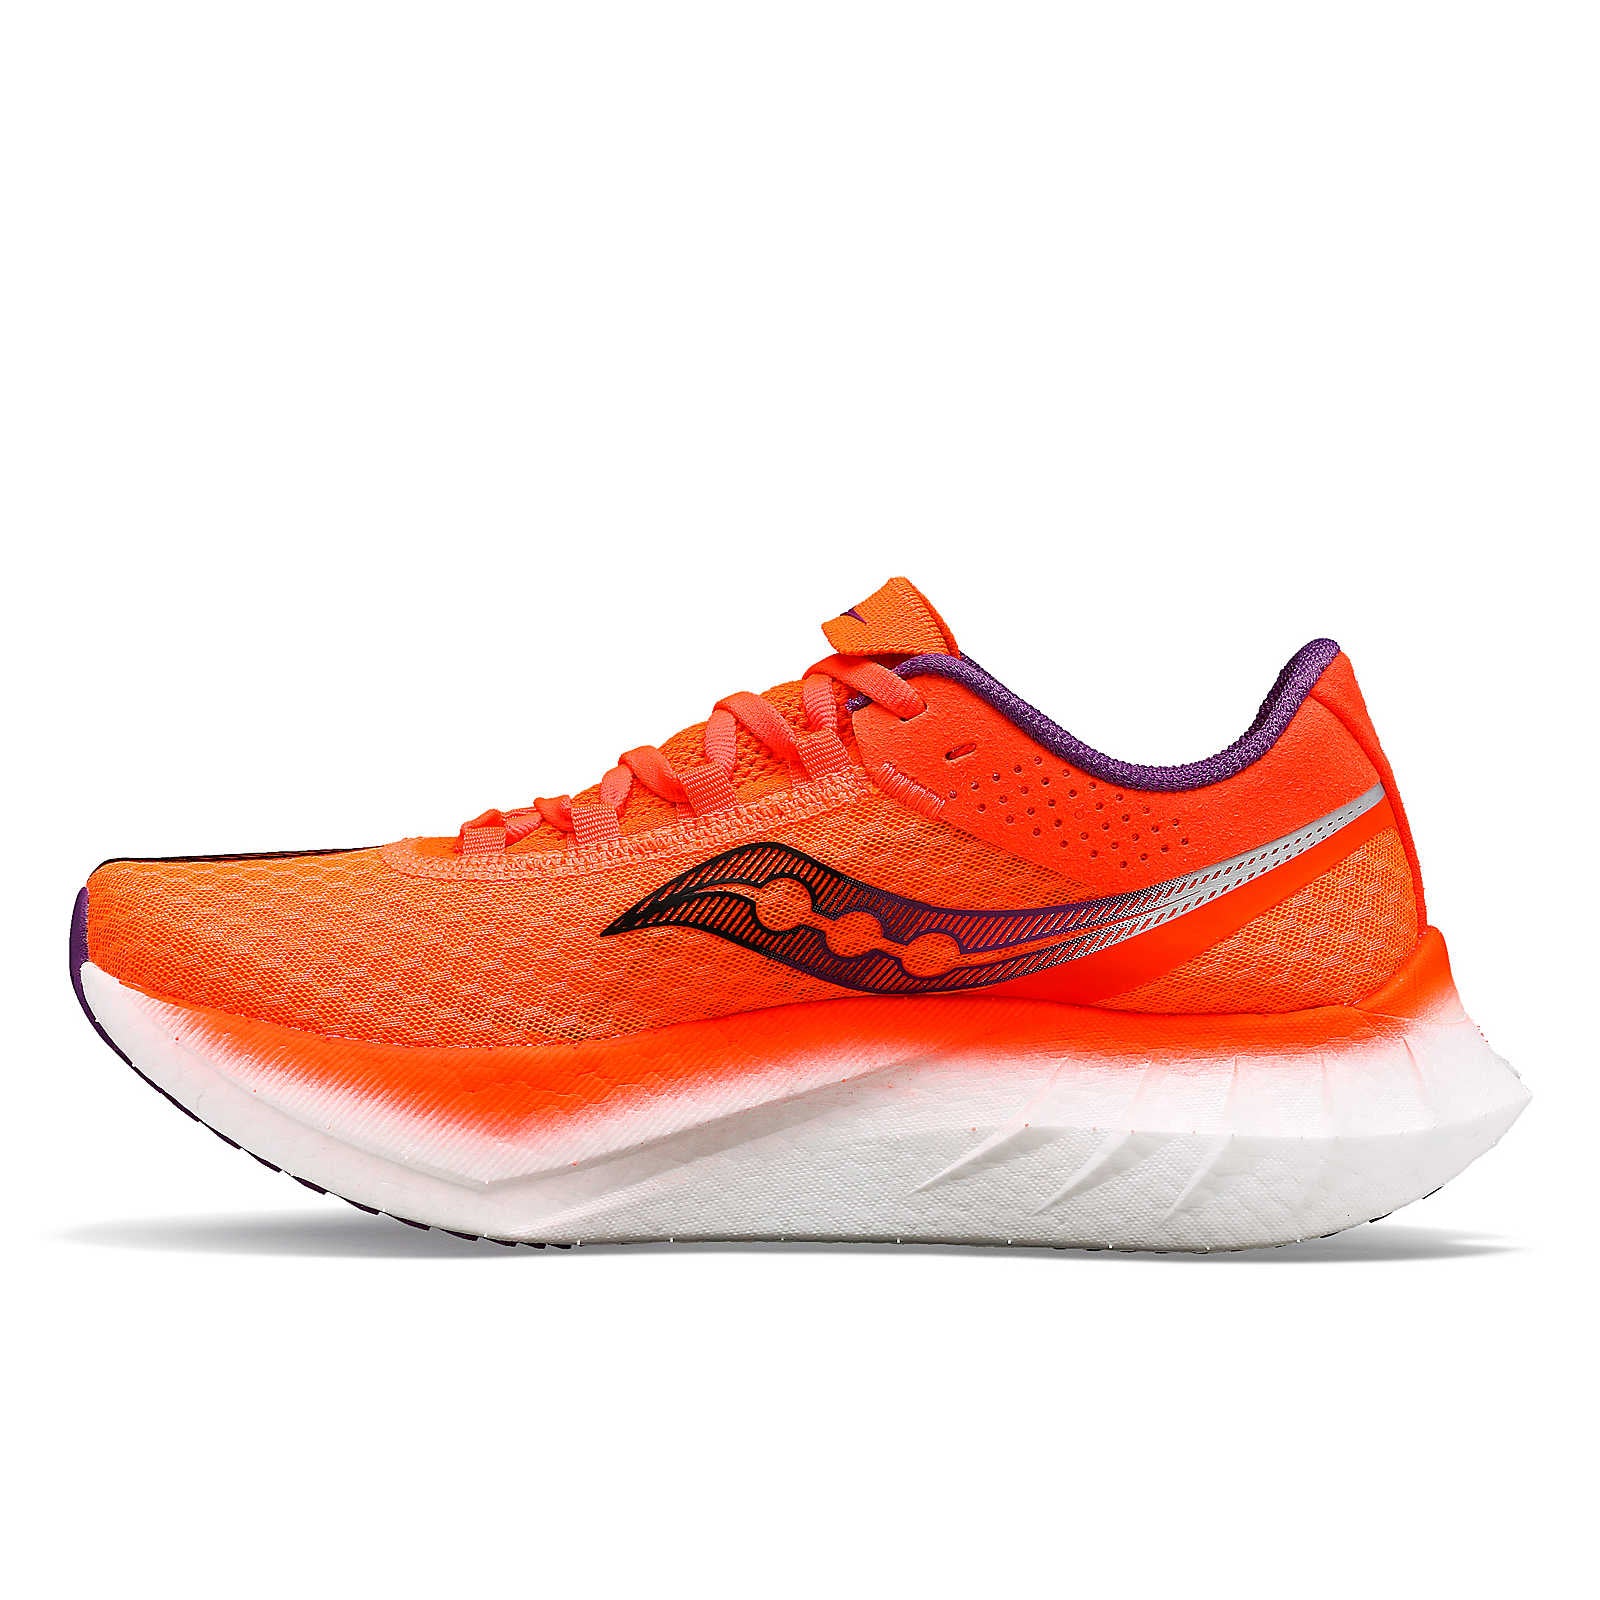 The medial side of te Endorphin Pro 4 is fairly basic and has the Saucony logo 